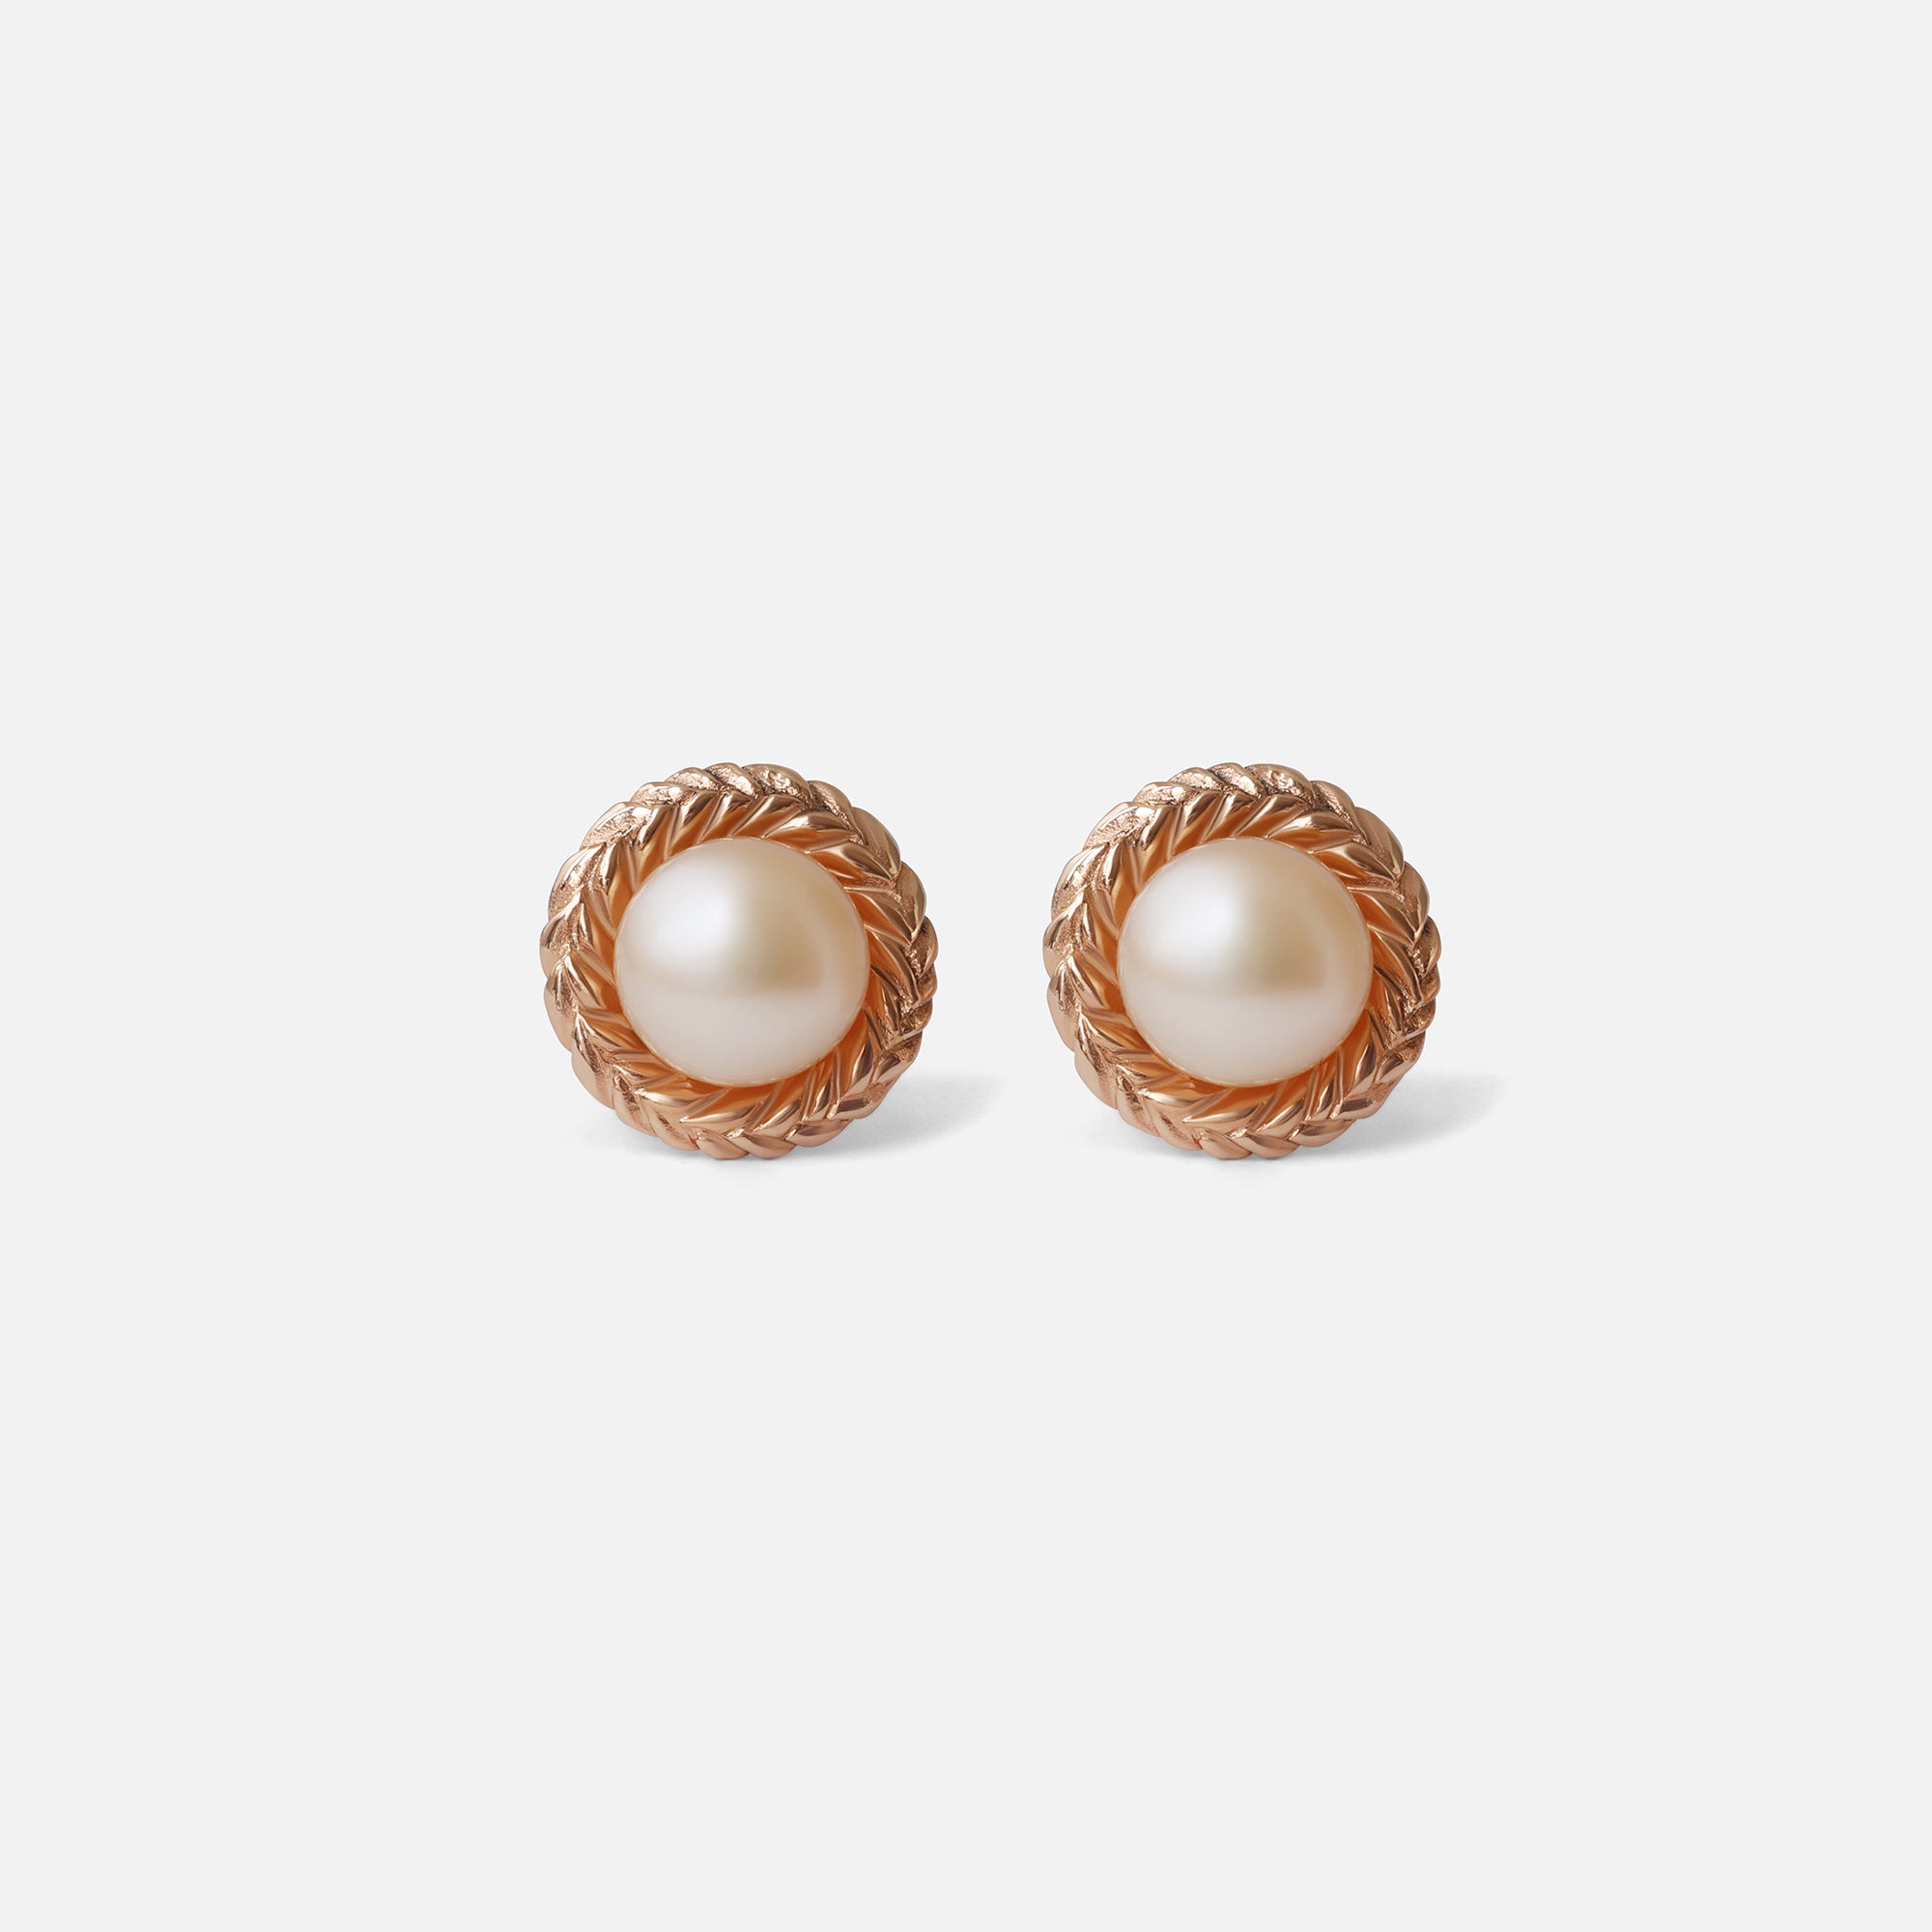 Braided Wreath Studs By O Channell Designs in earrings Category